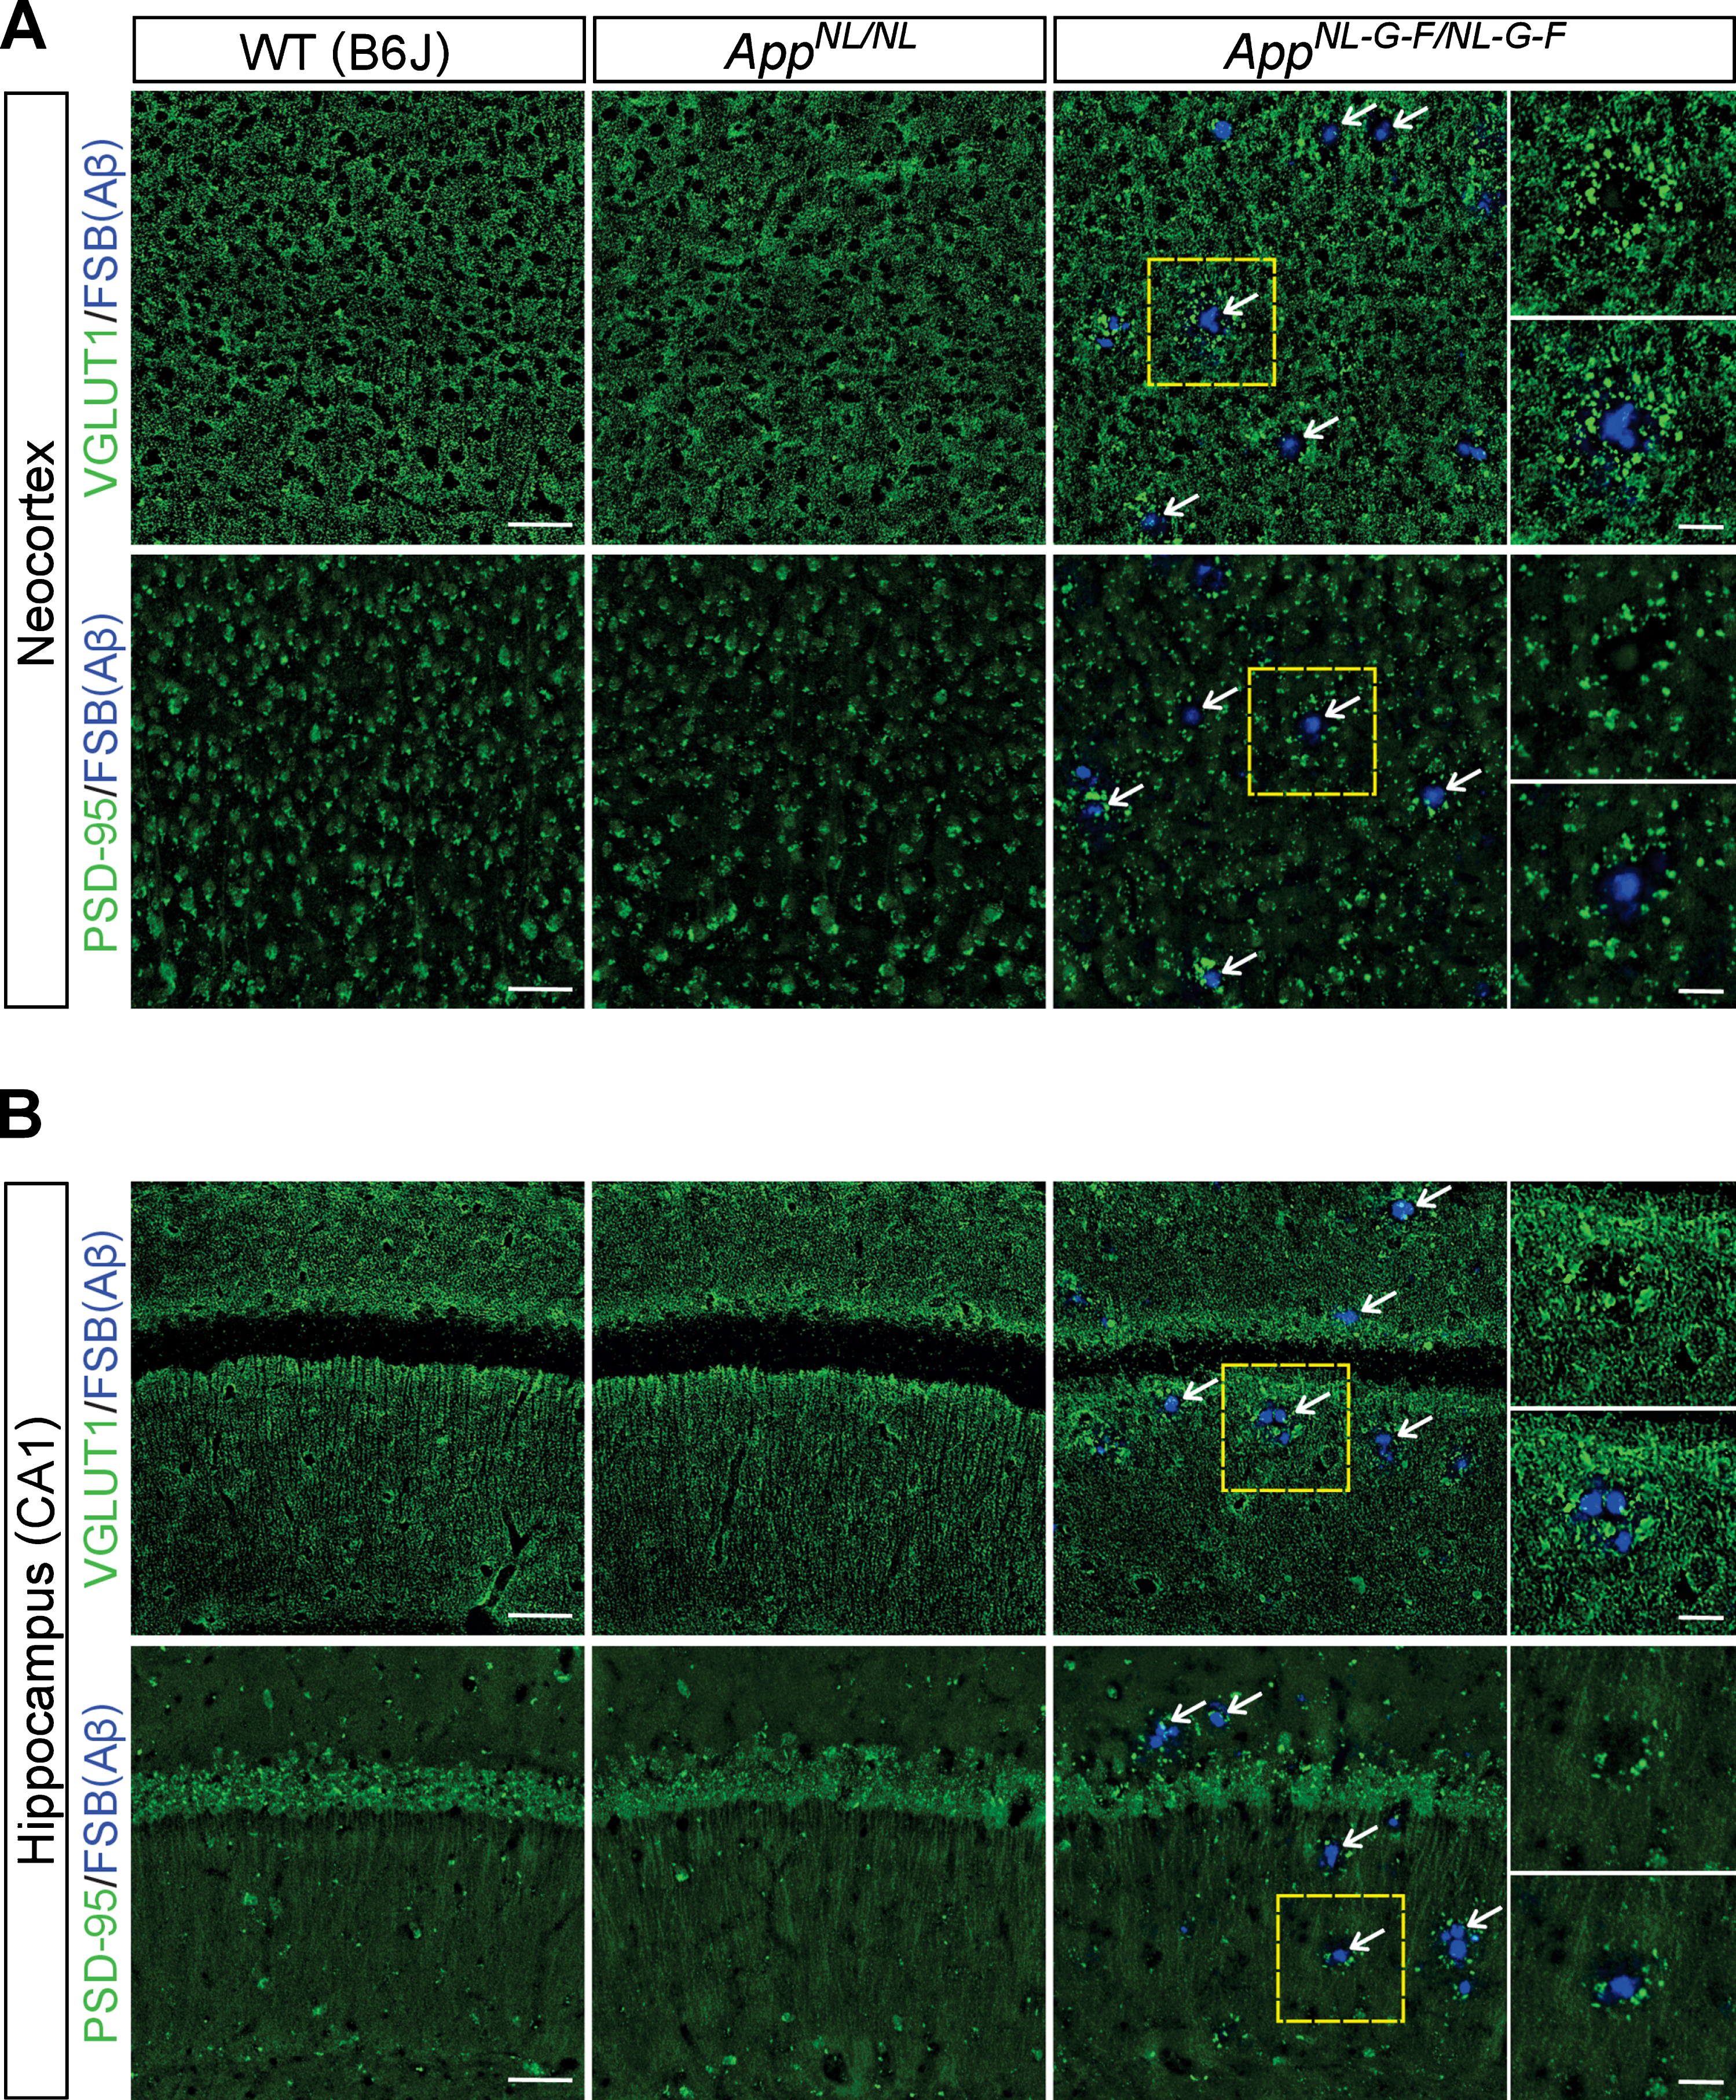 Loss of glutamatergic synapses is associated with the vicinity of Aβ plaques. A, B) Representative images of the neocortex (A) and hippocampal CA1 subfield (B) from frozen coronal brain sections immunostained with anti-VGLUT1 and anti-PSD-95 antibodies (indicated by green in A and B) were shown. FSB was used for detecting Aβ plaques (indicated by blue in A and B). White arrows point to representative examples of Aβ plaque. Insets show higher-magnification views in the corresponding dashed yellow squares. Scale bars represent 50μm. In the inset images, scale bars represent 20μm. n = 3/genotype.